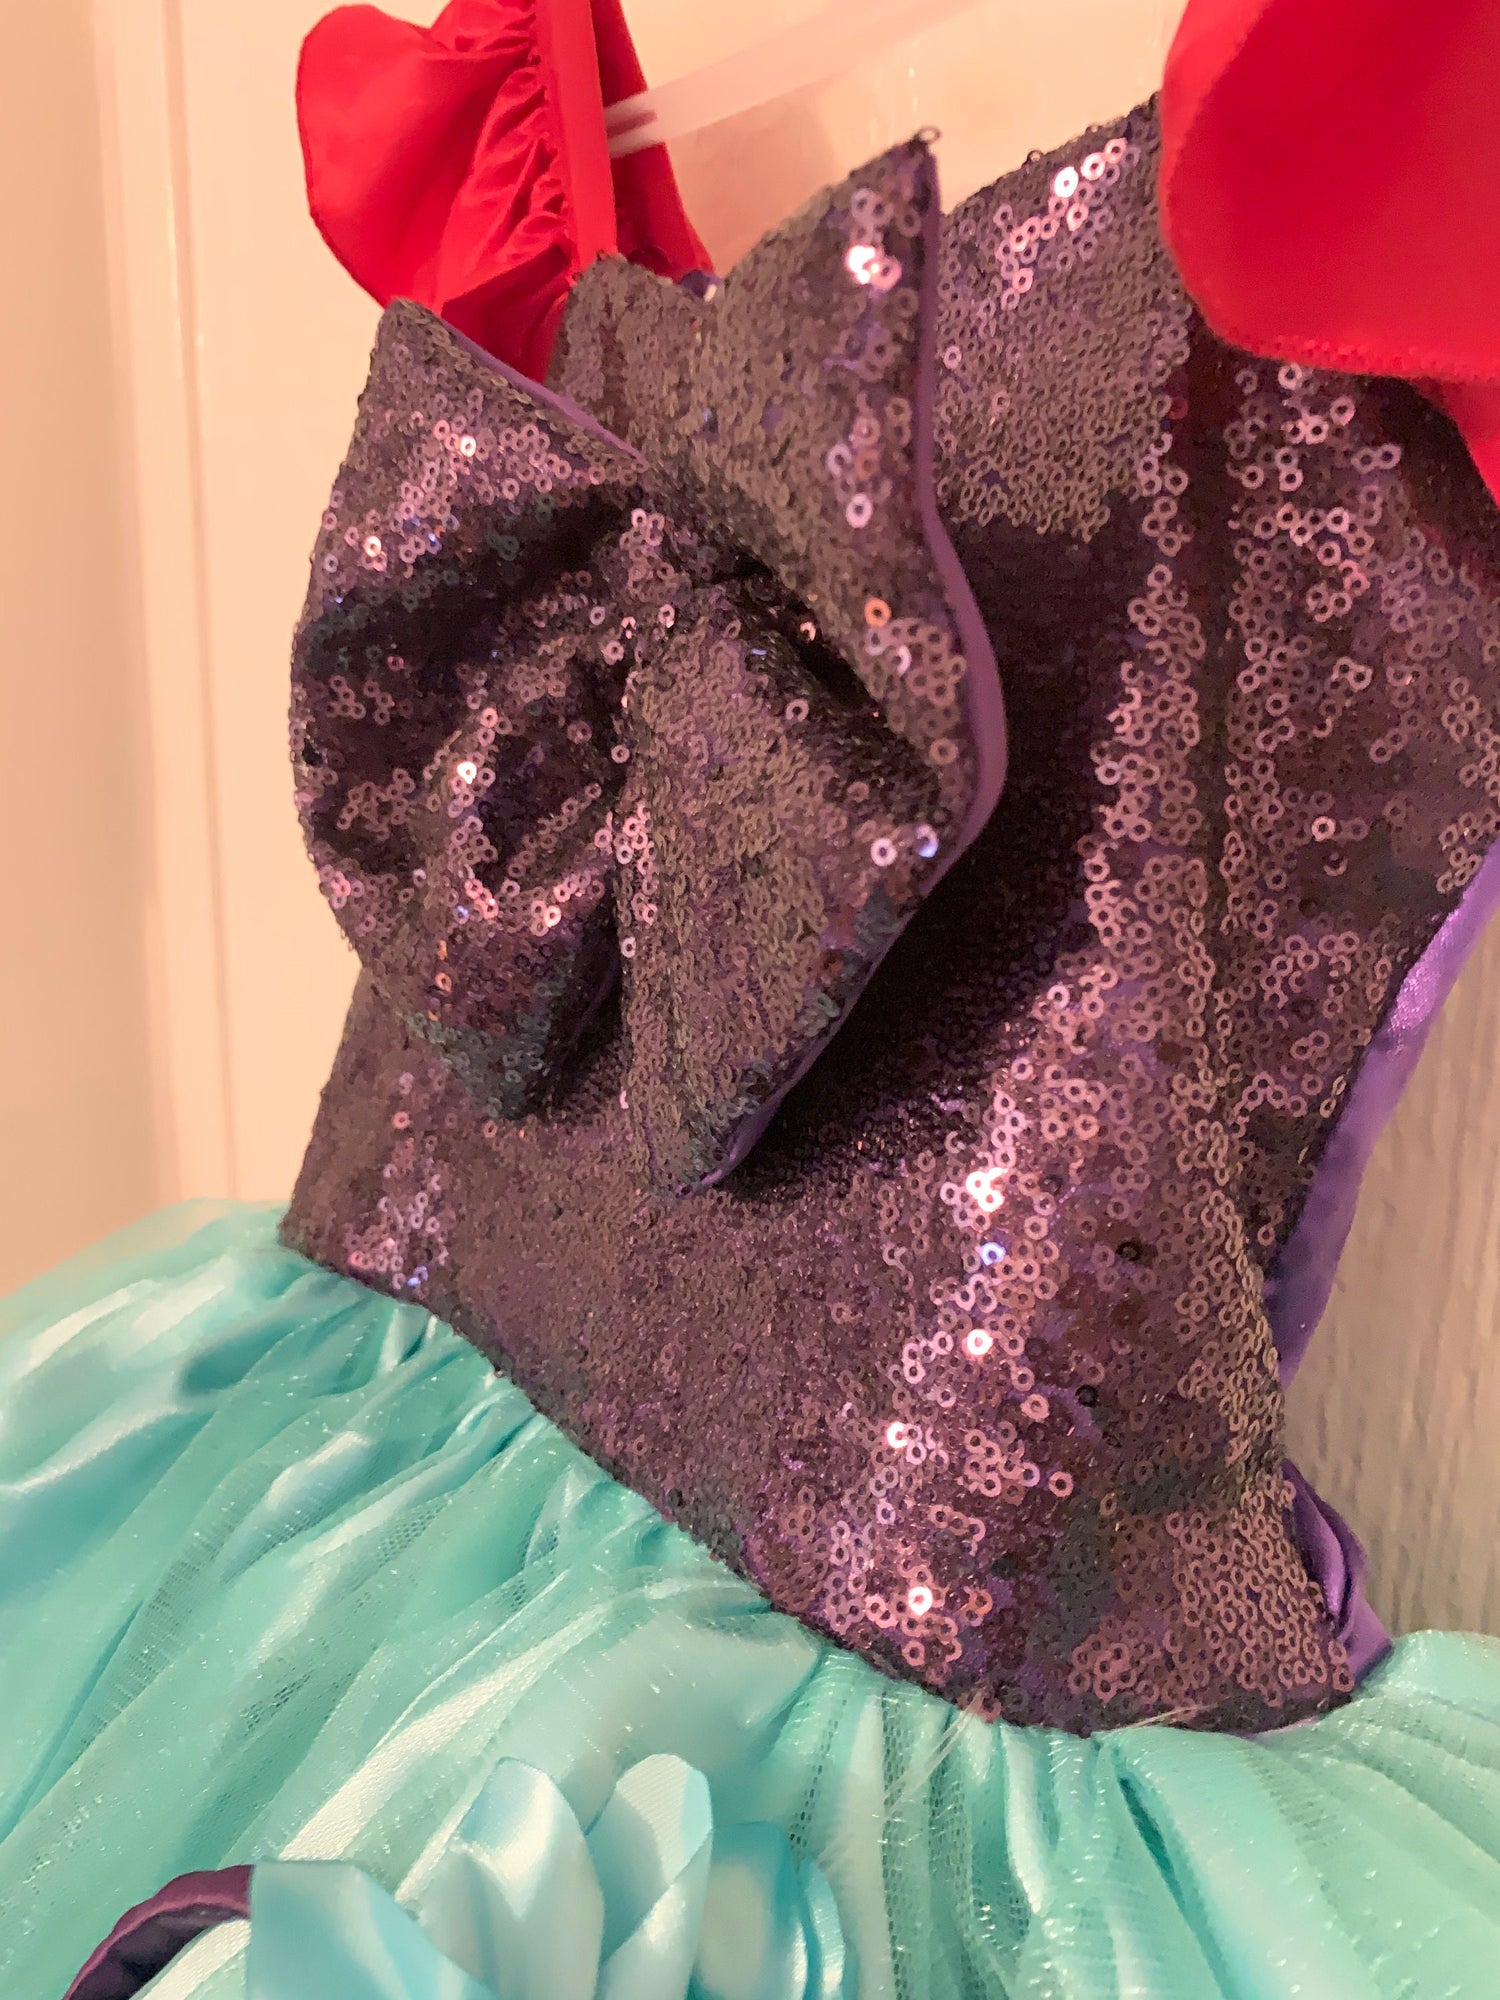 Emma's Magical Dream, Merimaid Tutu Dress, sequin top with teal tulle tutu bottom, with red ruffle sleeves, close up of purple sequin top with back bow